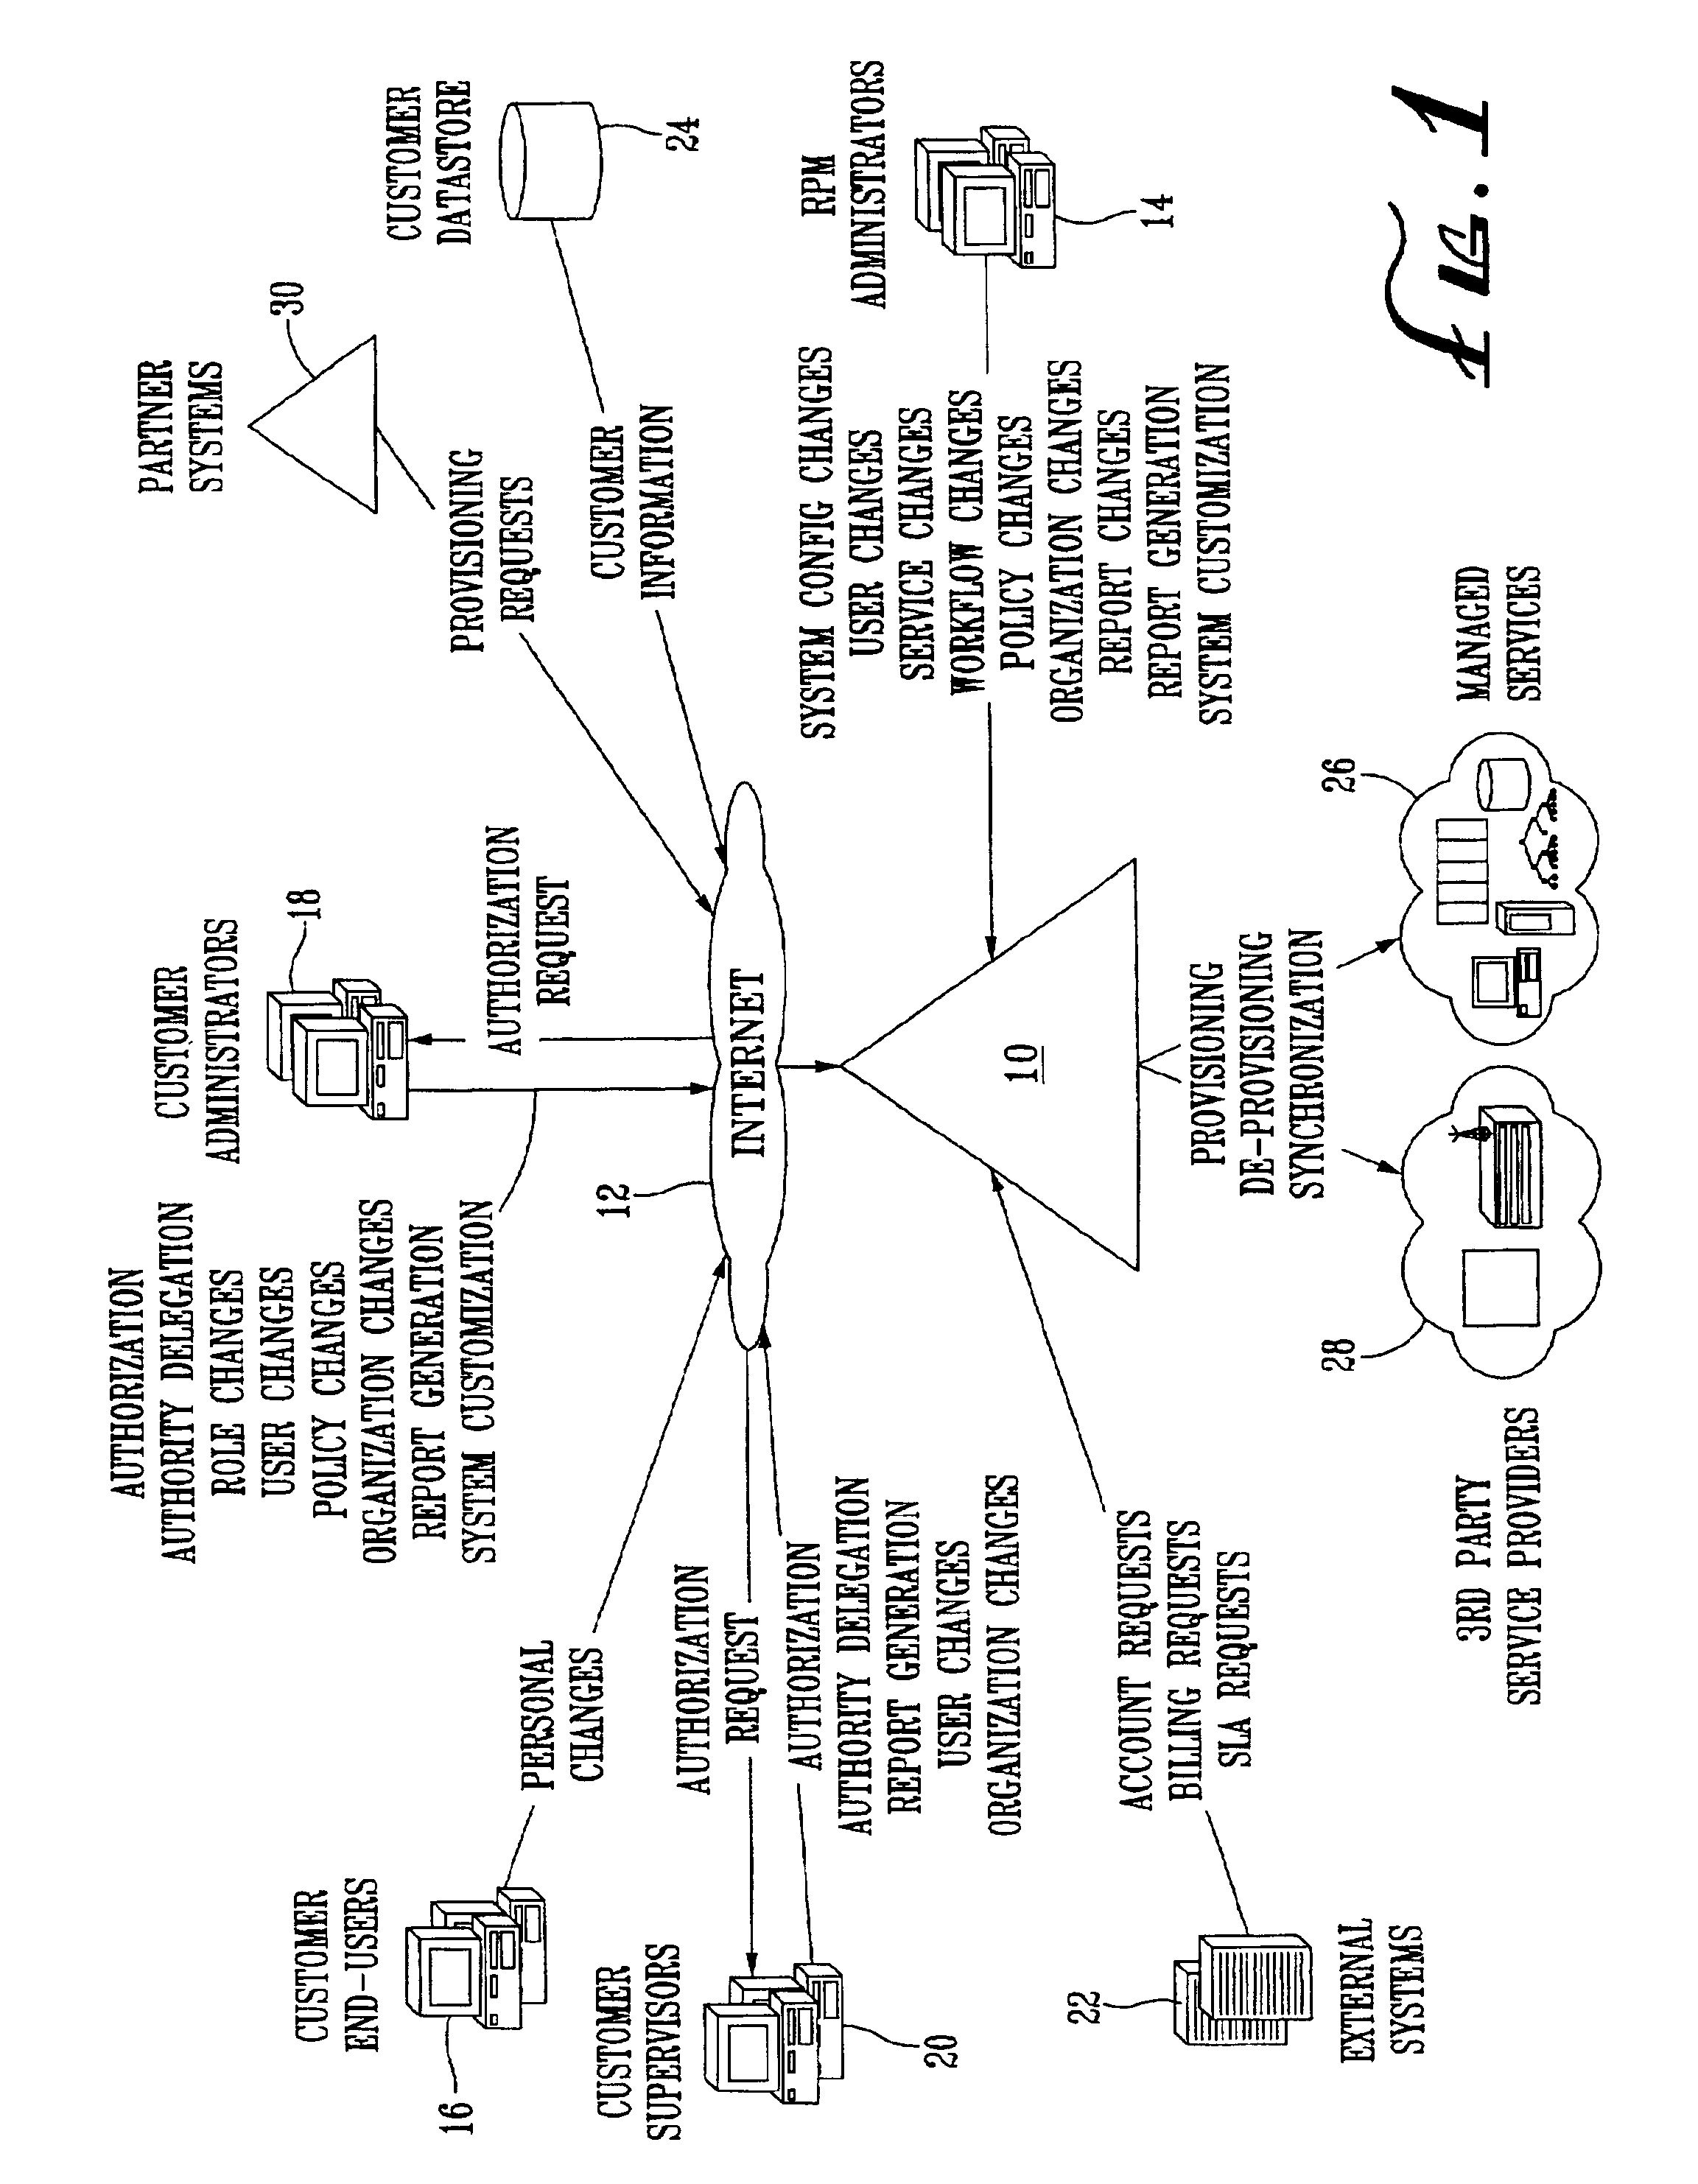 System and method for provisioning resources to users based on policies, roles, organizational information, and attributes